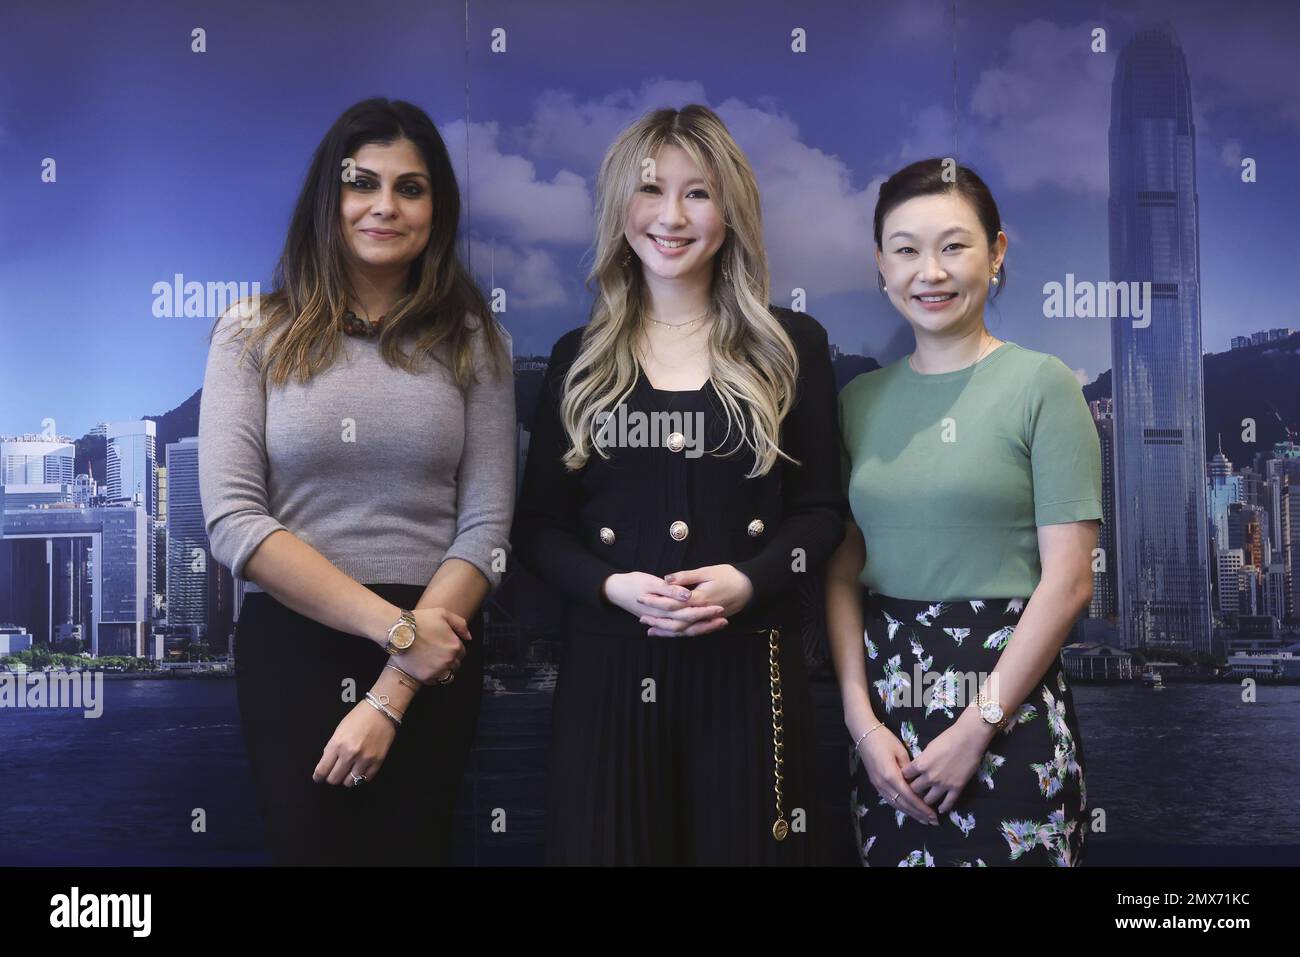 (L to R) Mayer Brown partner Amita Haylock, Women in Law Hong Kong (WILHK) chair lady Alison Tsai, and counsel in the Corporate & Securities practice Mayer Brown Hong Kong office Helen Wang, at the Mayer Brown's office  in Central. 11JAN23 SCMP / Jonathan Wong Stock Photo